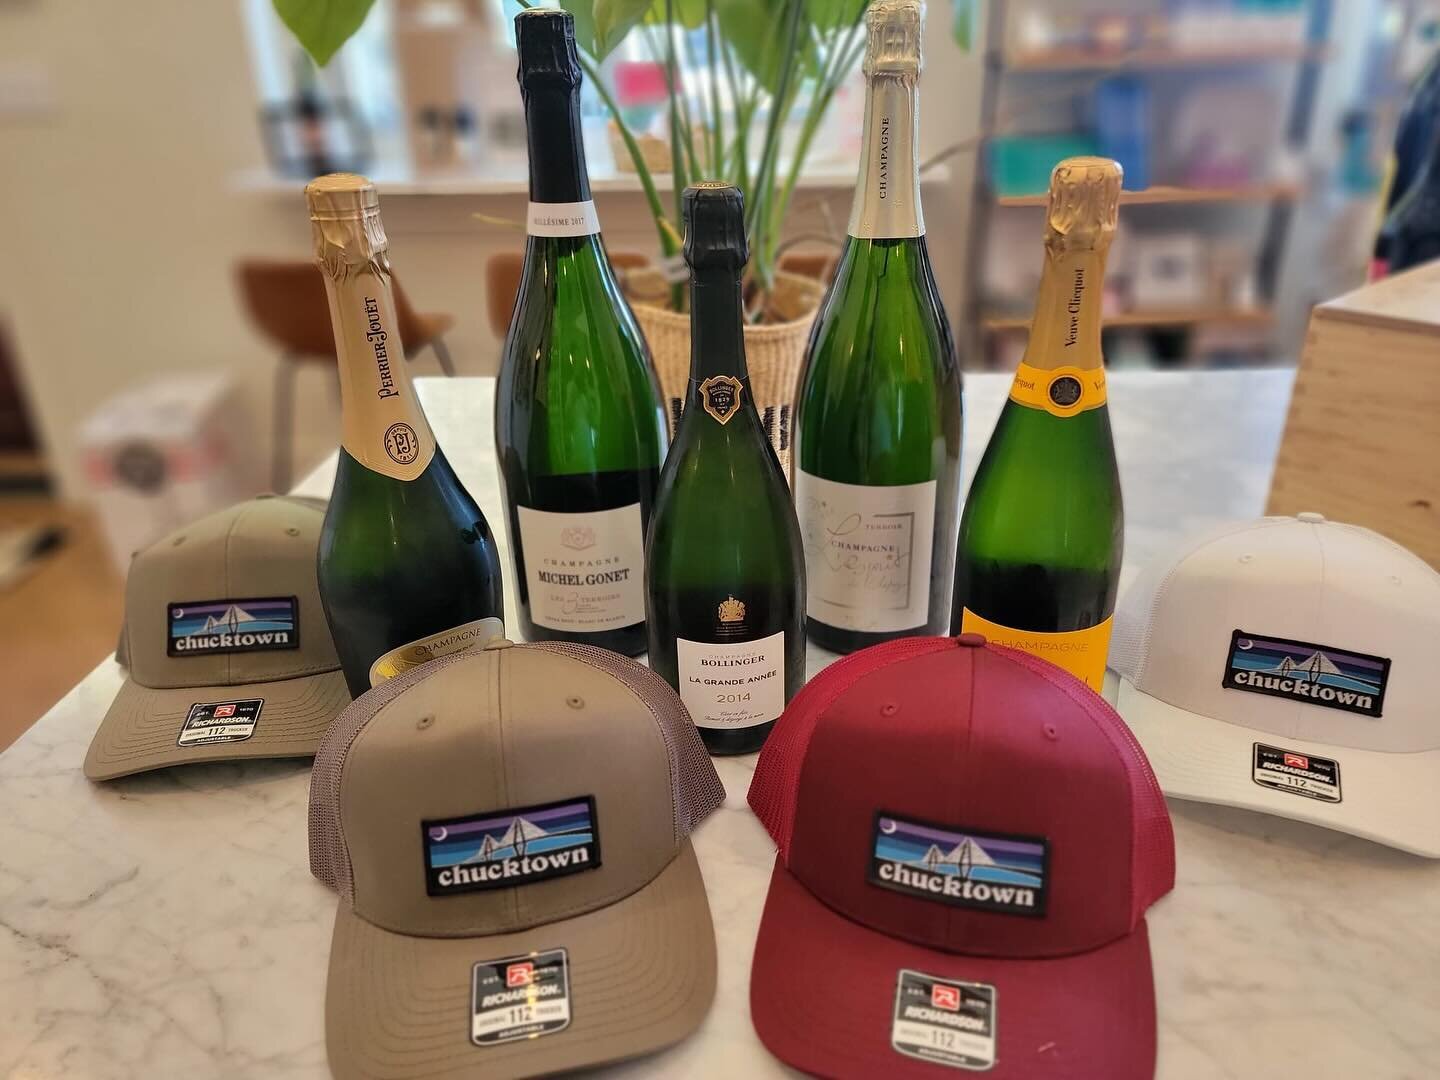 Happy Bridge Run Weekend! 

Make sure to stop by and pick up some bomb bars for tomorrow&rsquo;s run. Then stop back for some celebratory bubbles! 

🏃&zwj;♀️ 🏃&zwj;♂️ 🏃